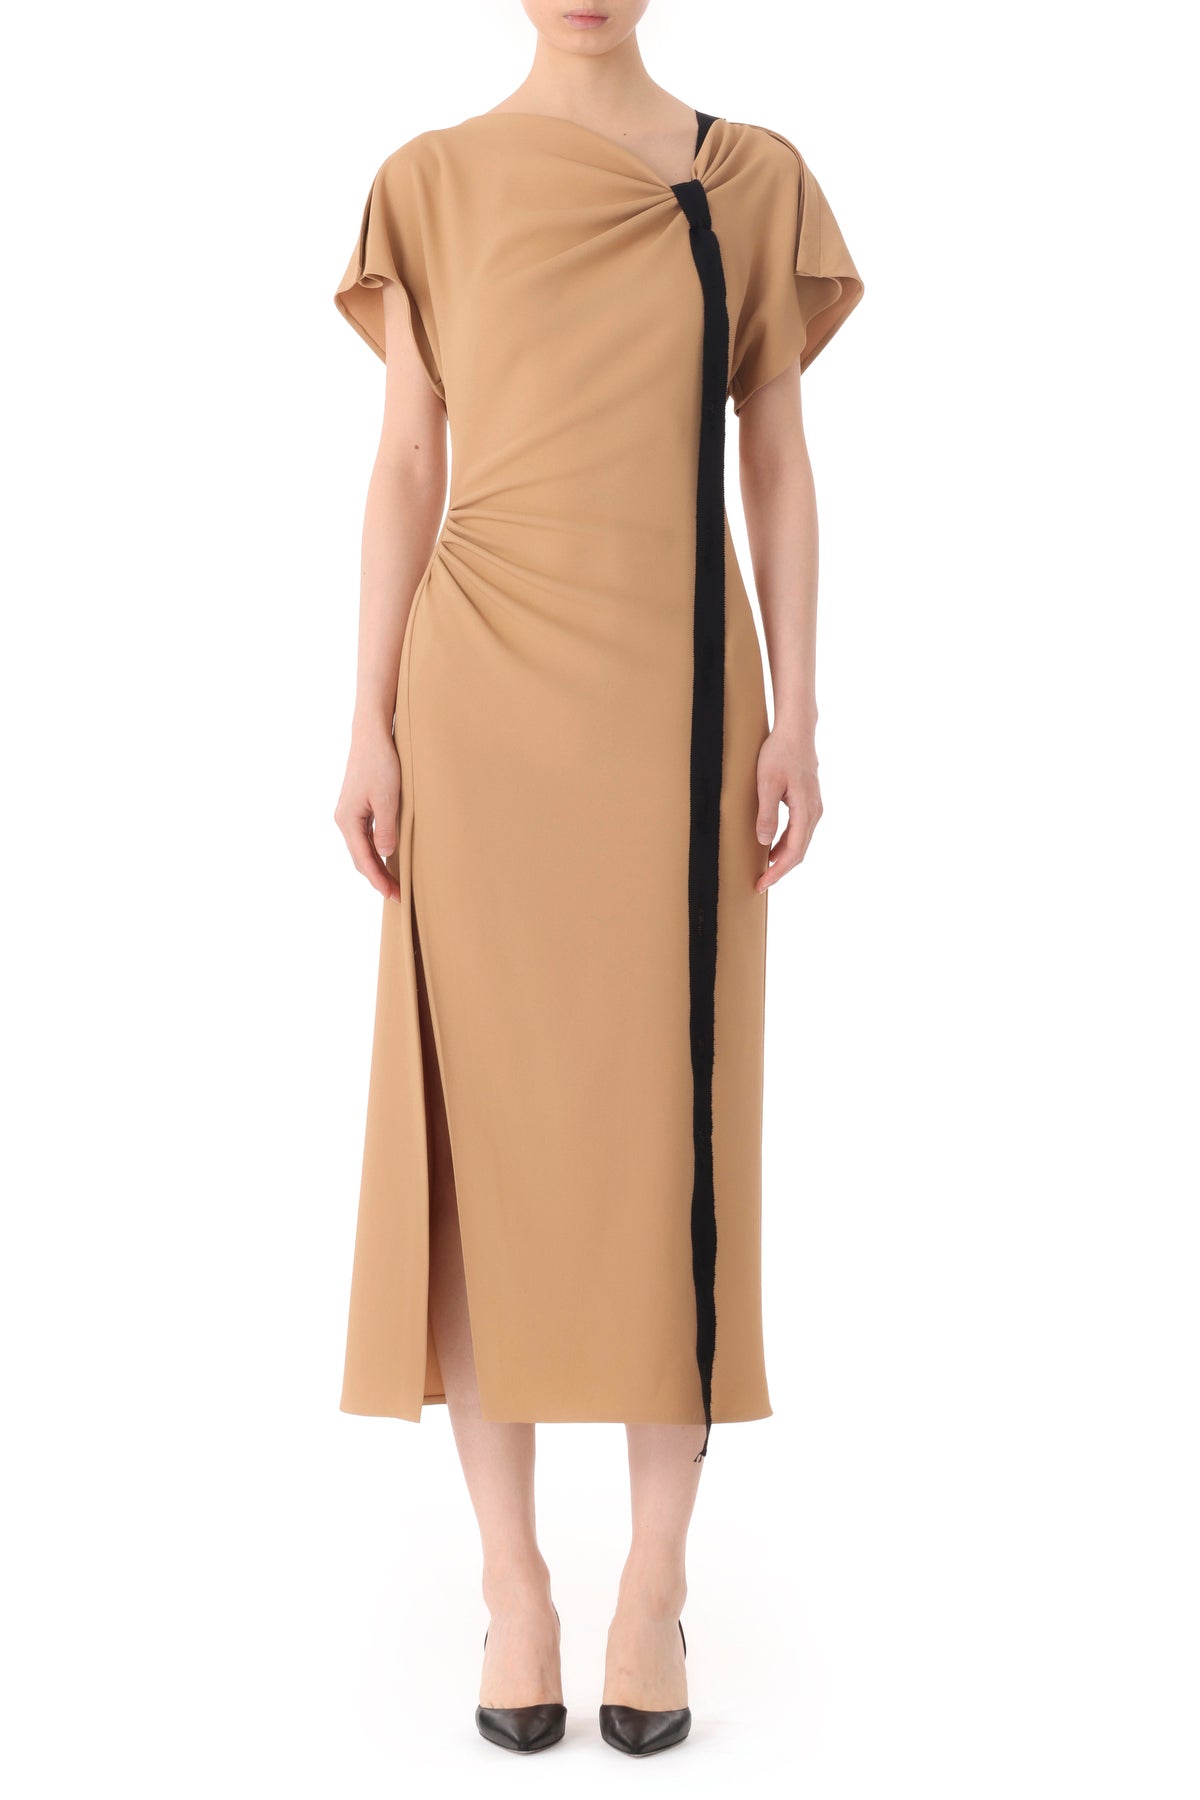 DRAPED NECK FLUID CREPE DRESS WITH TIE DETAIL